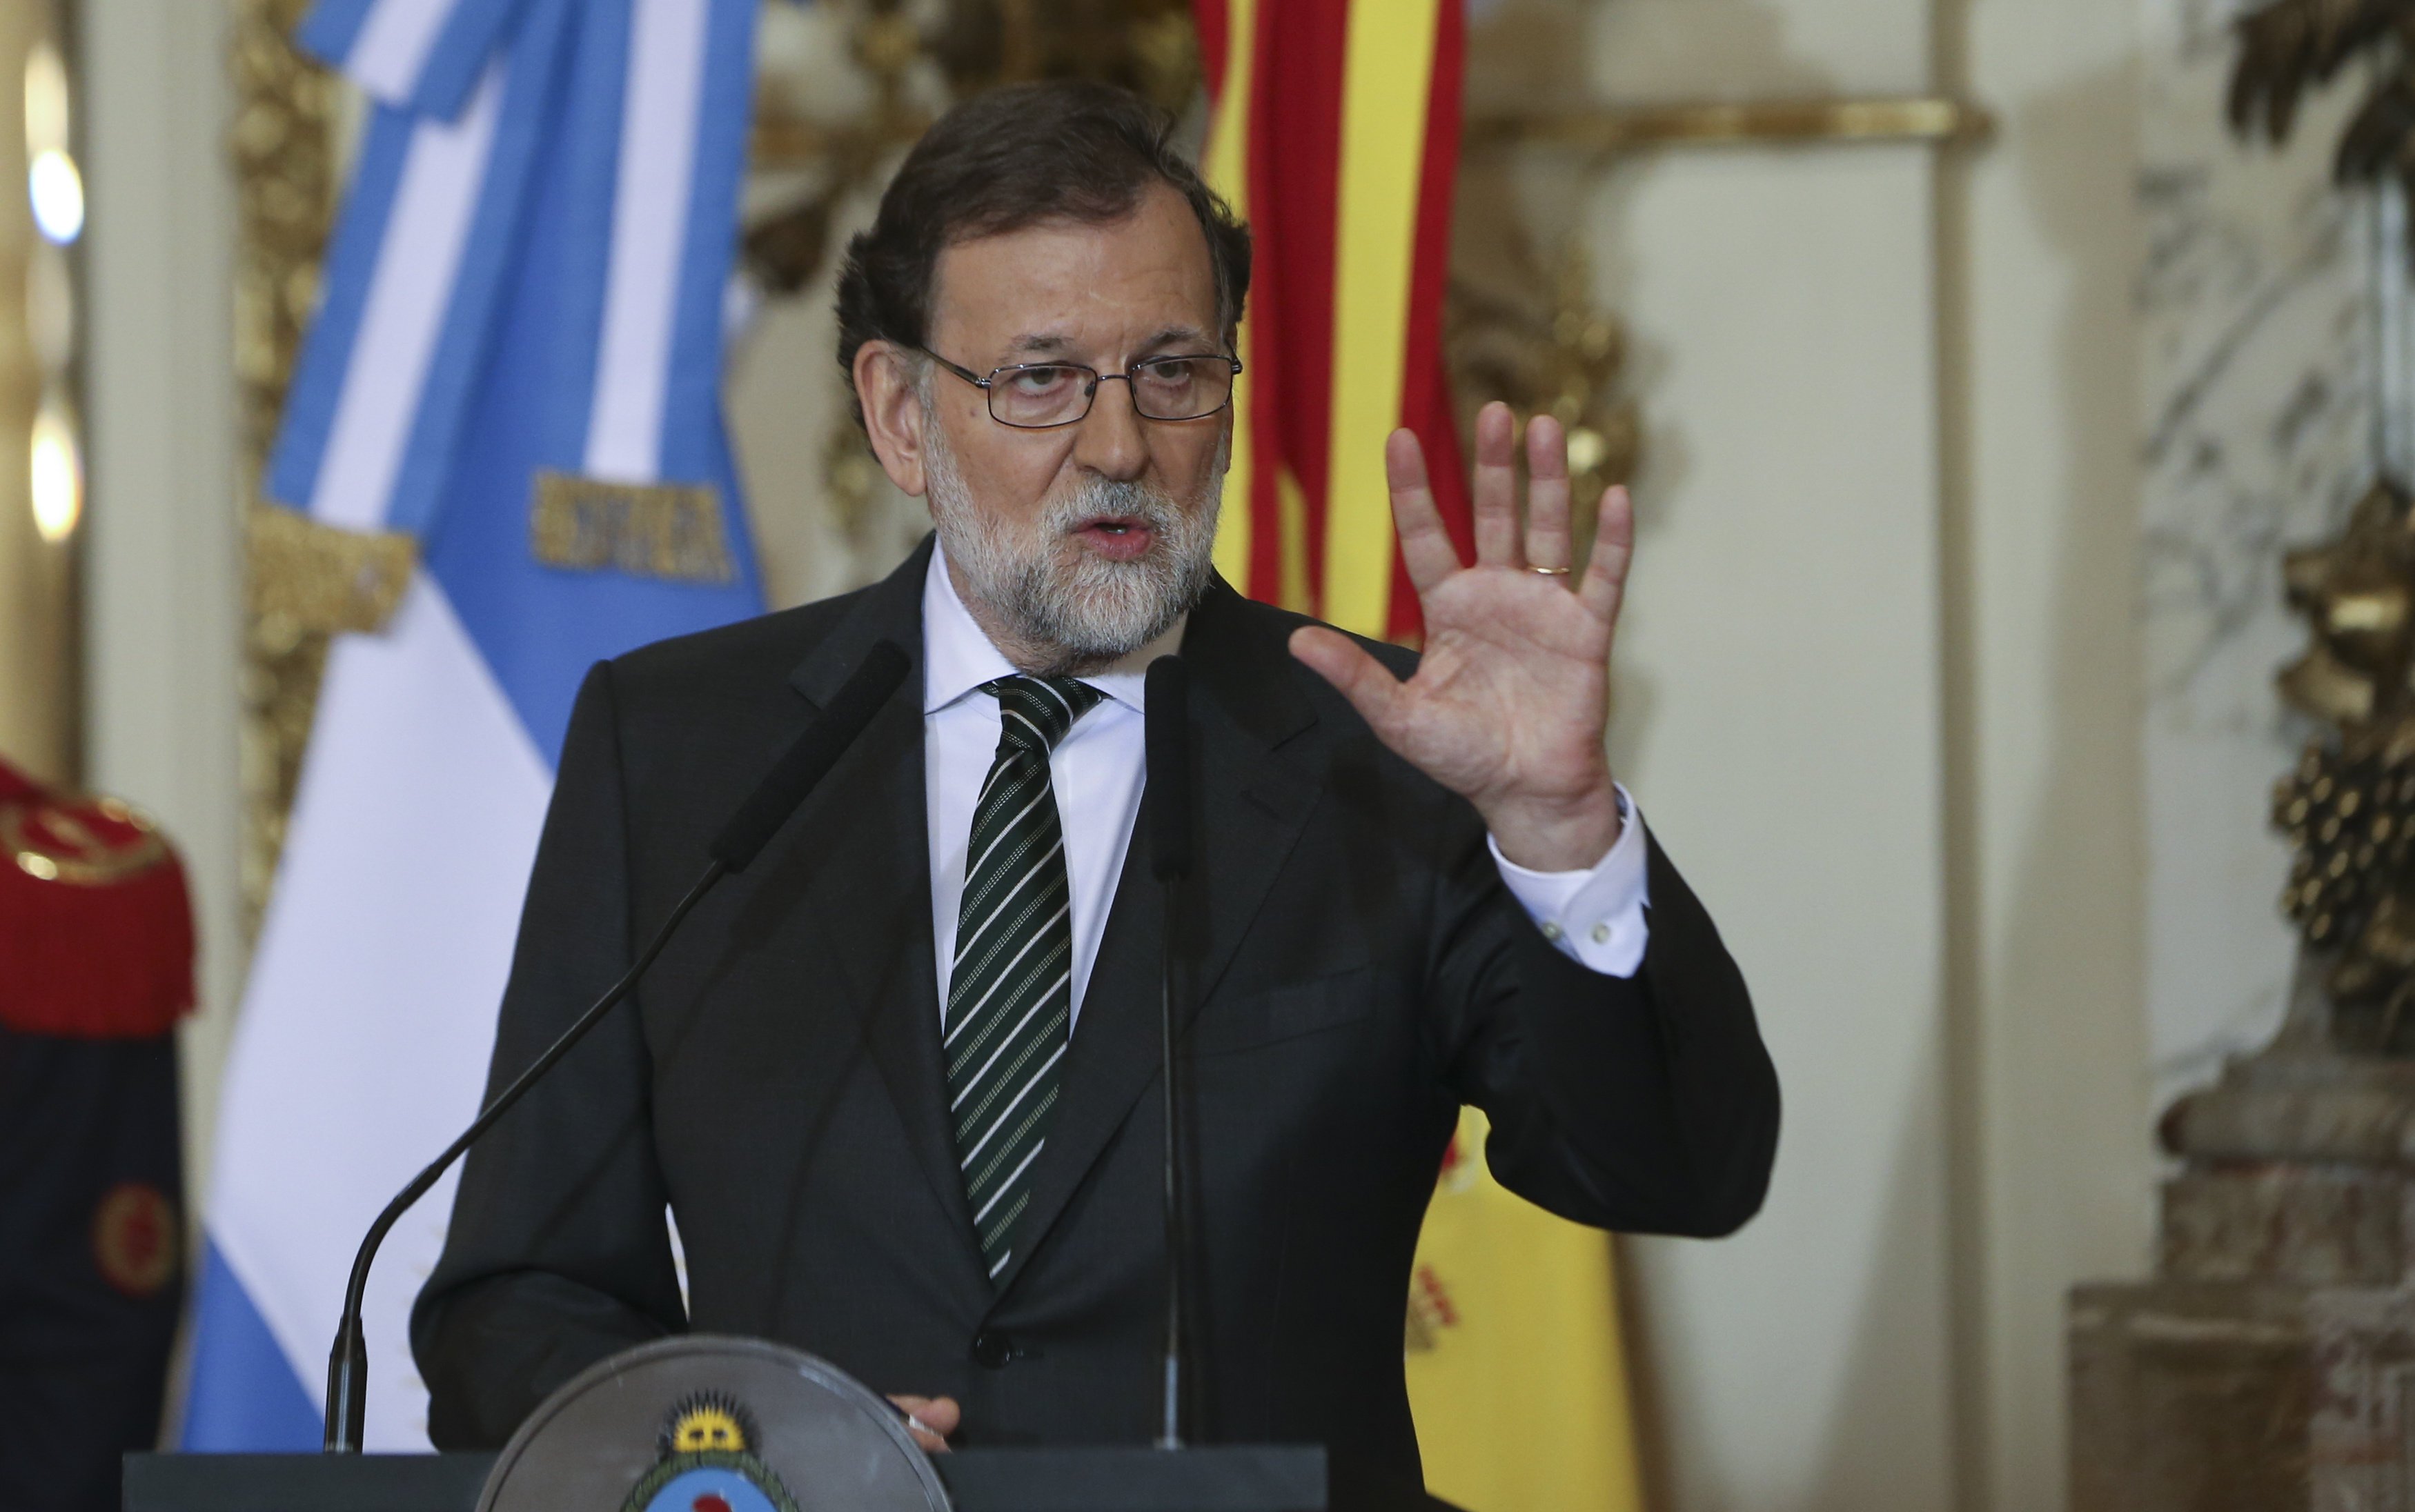 Rajoy tries to lower tension with Germany over Puigdemont